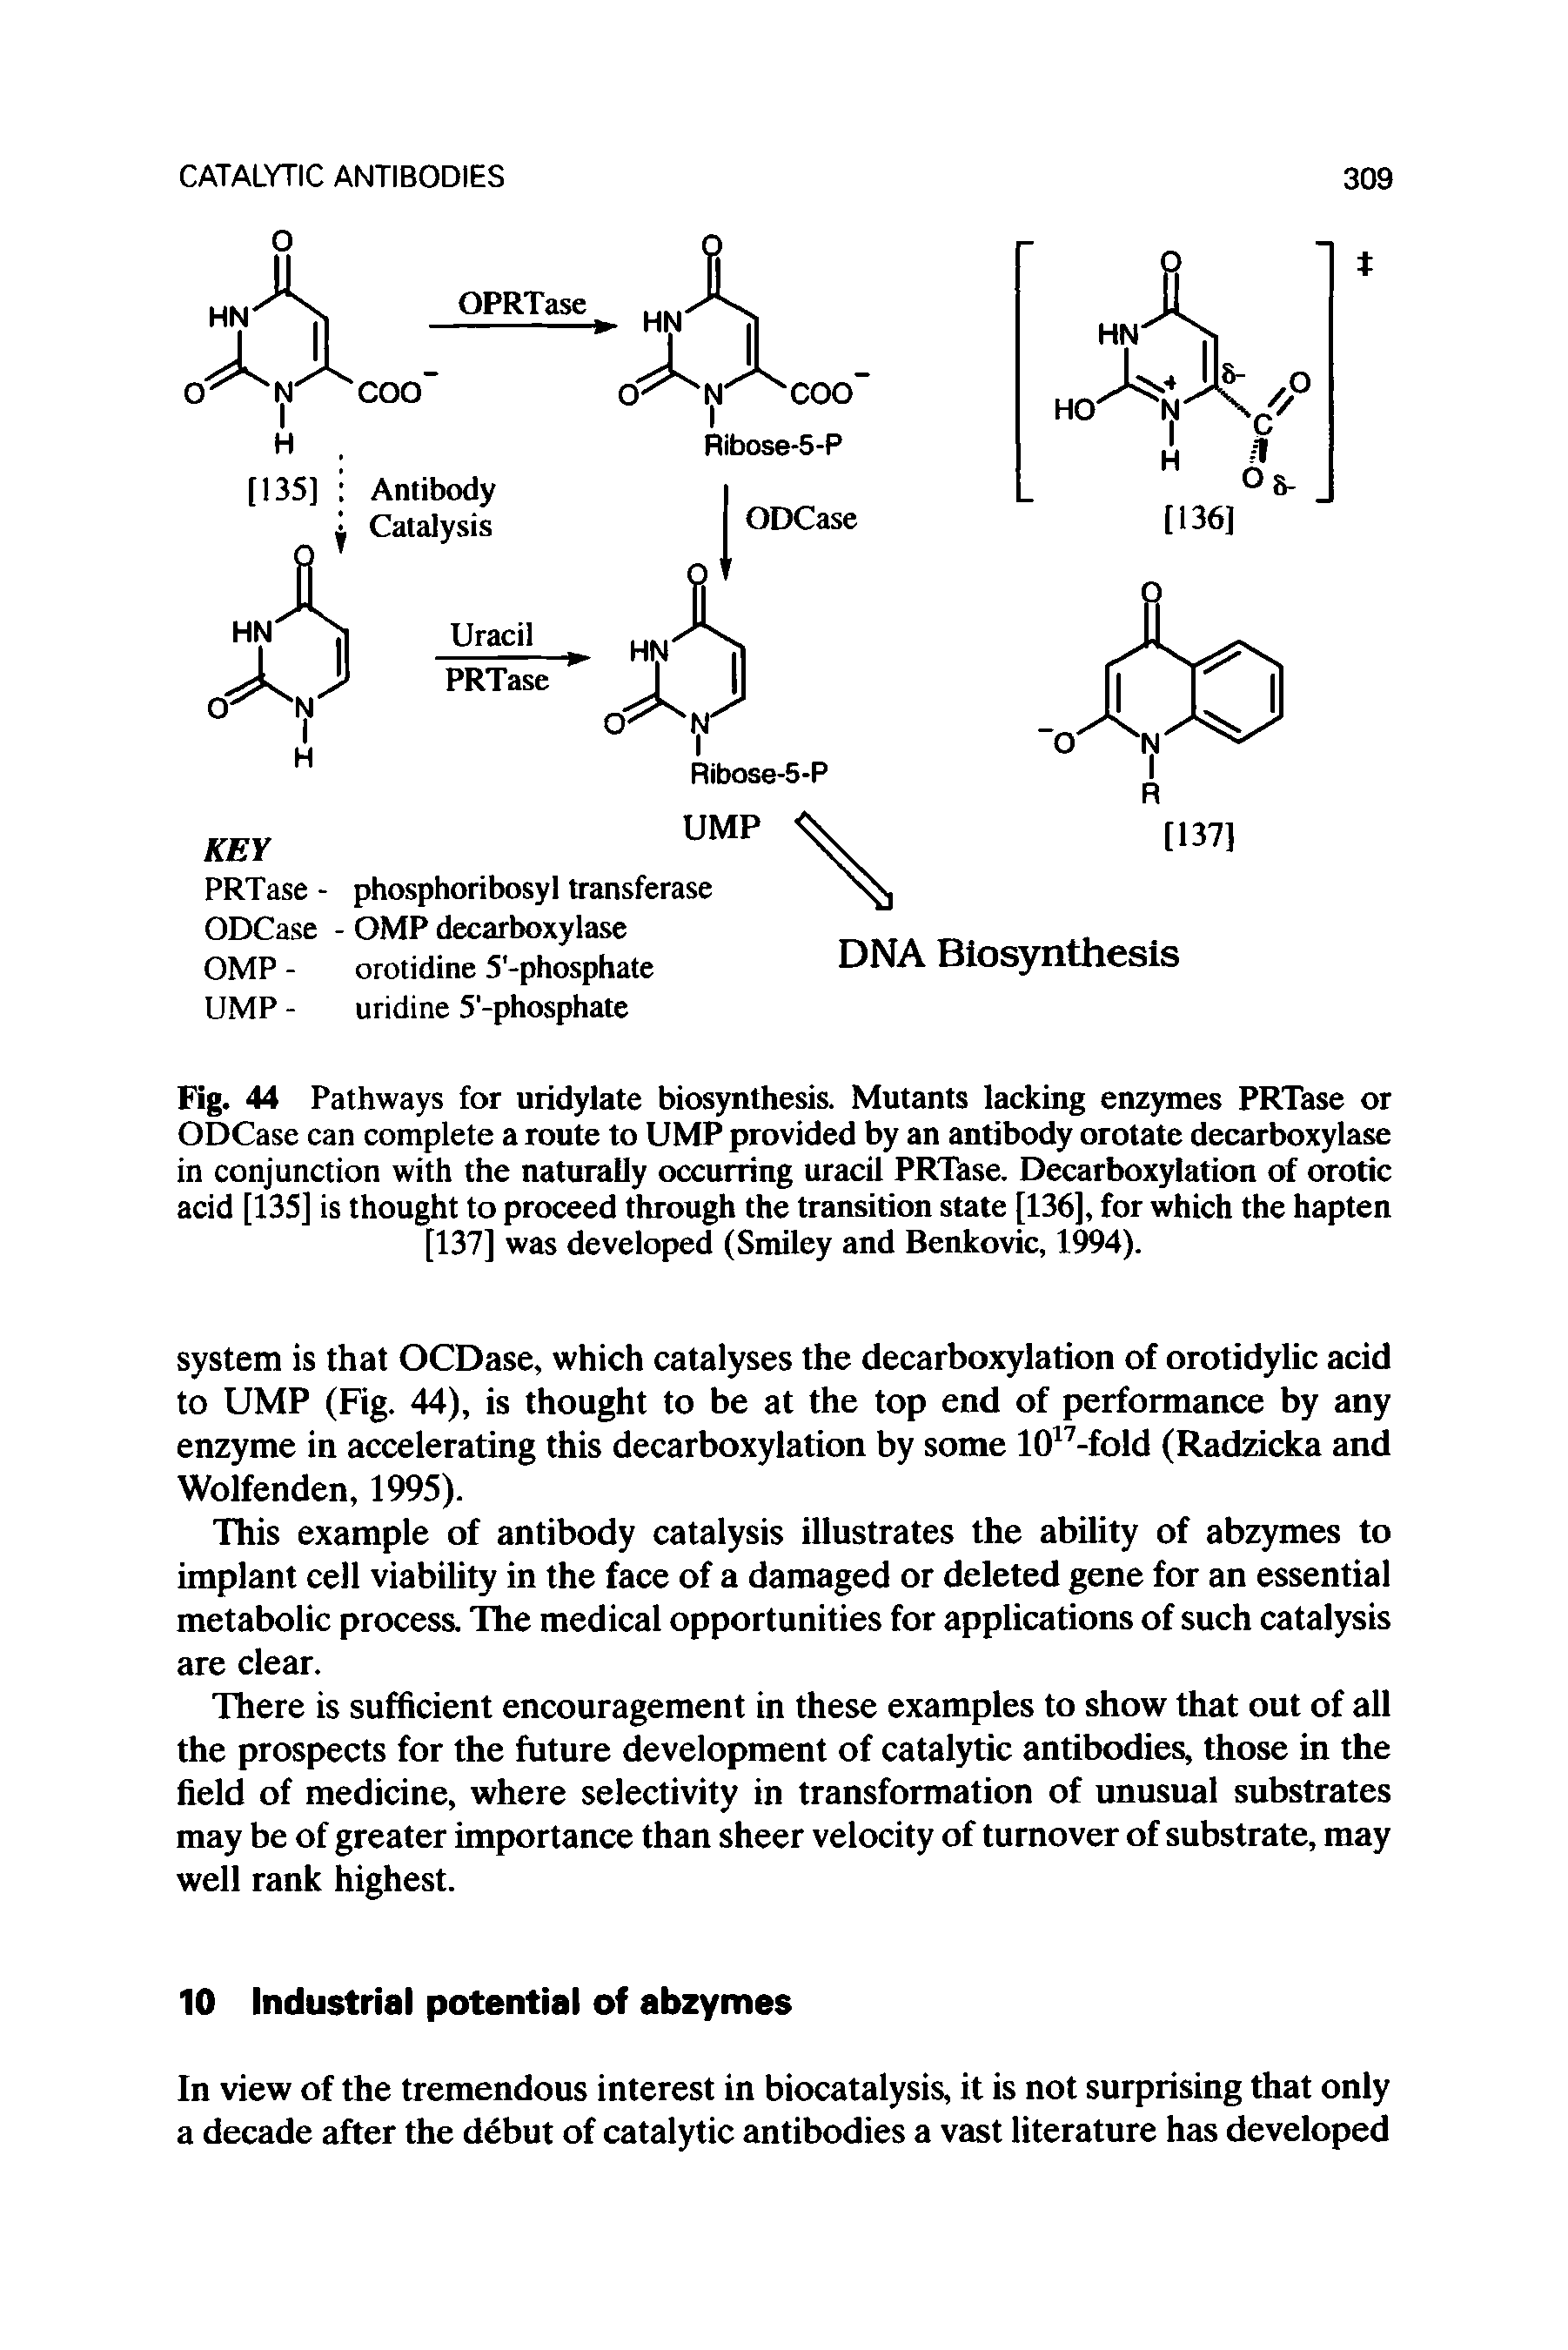 Fig. 44 Pathways for uridylate biosynthesis. Mutants lacking enzymes PRTase or ODCase can complete a route to UMP provided by an antibody orotate decarboxylase in conjunction with the naturally occurring uracil PRTase. Decarboxylation of orotic acid [135] is thought to proceed through the transition state [136], for which the hapten [137] was developed (Smiley and Benkovic, 1994).